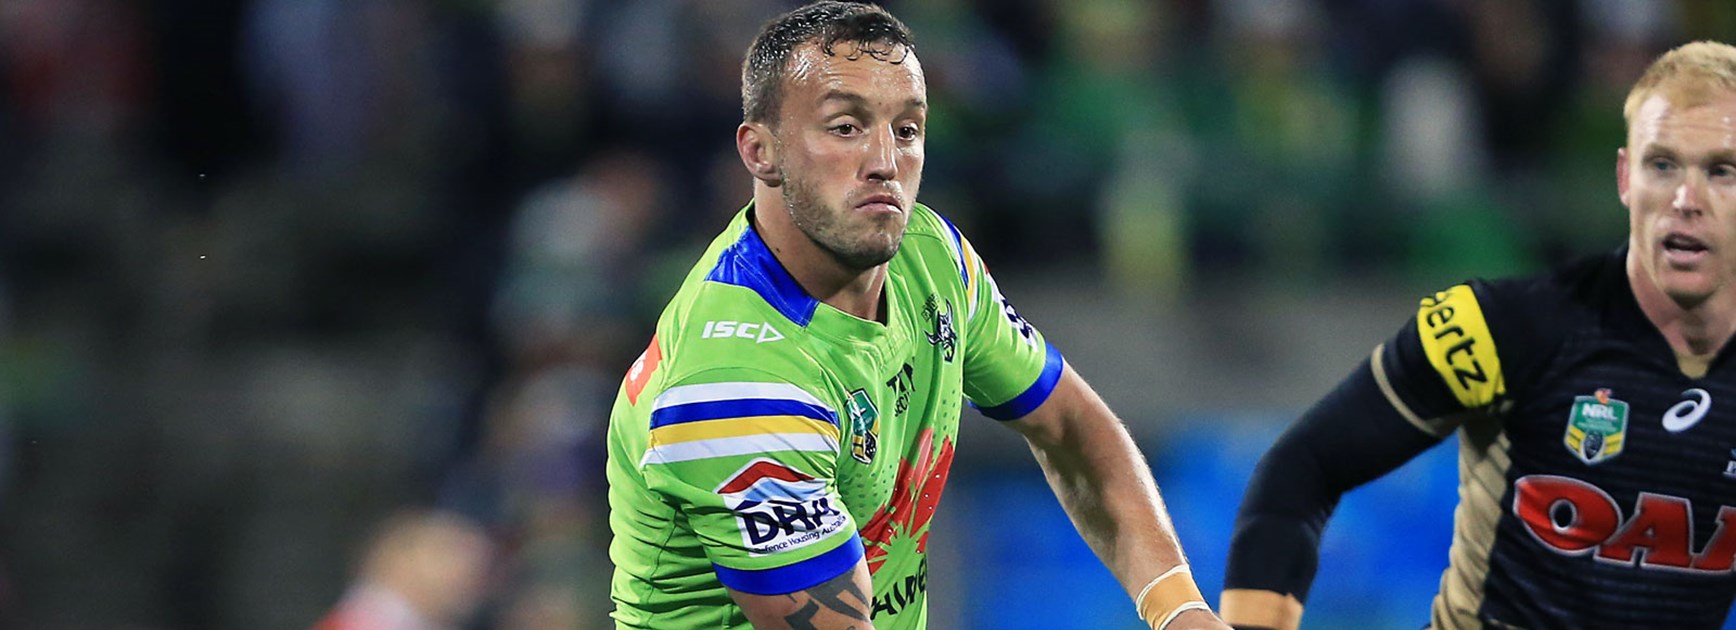 Raiders hooker Josh Hodgson against the Panthers in Finals Week 2.